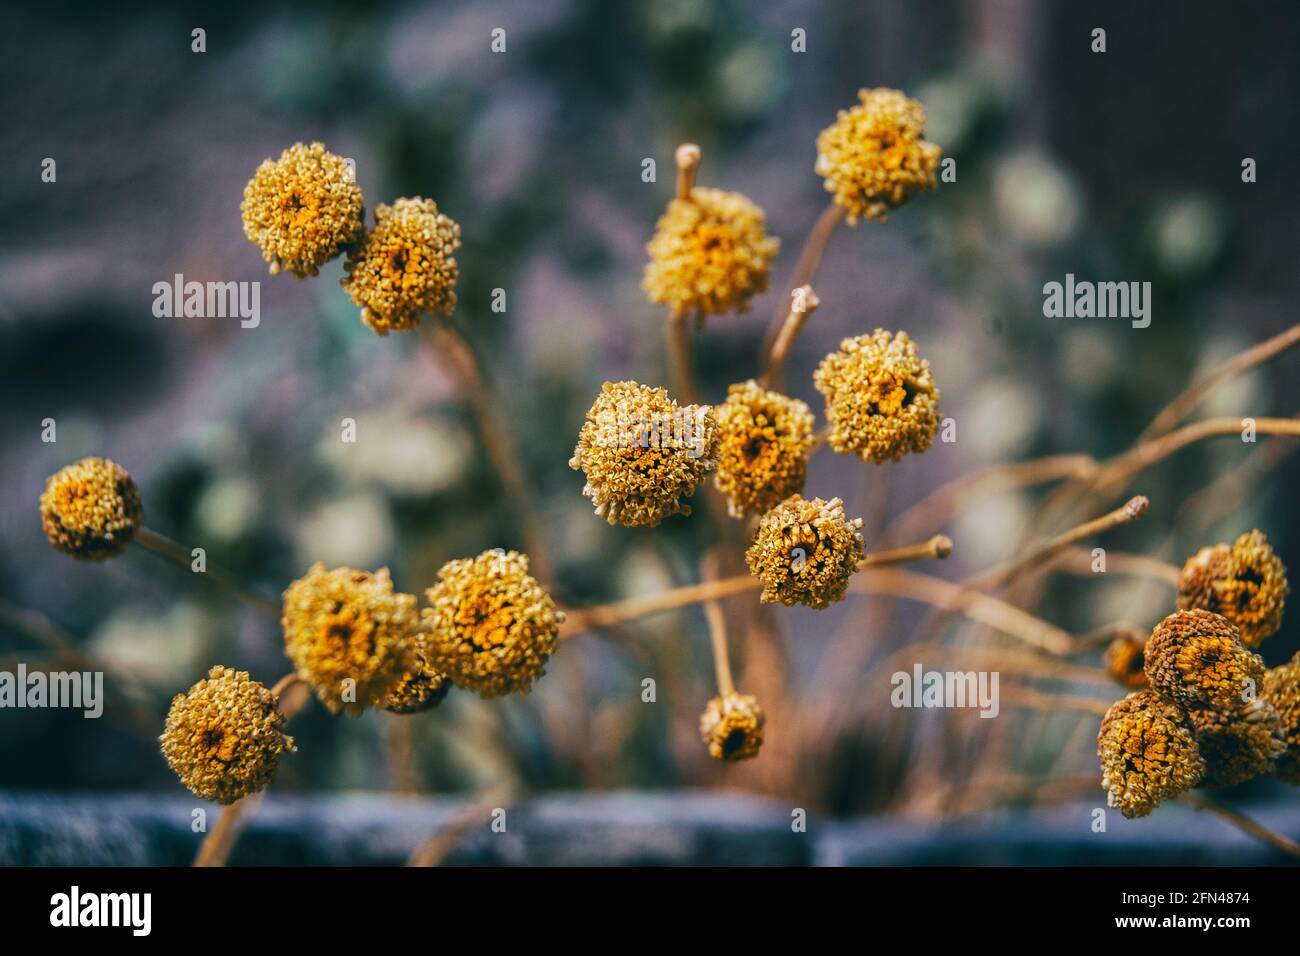 small, yellow, half-dried santolina flowers in a pot Stock Photo